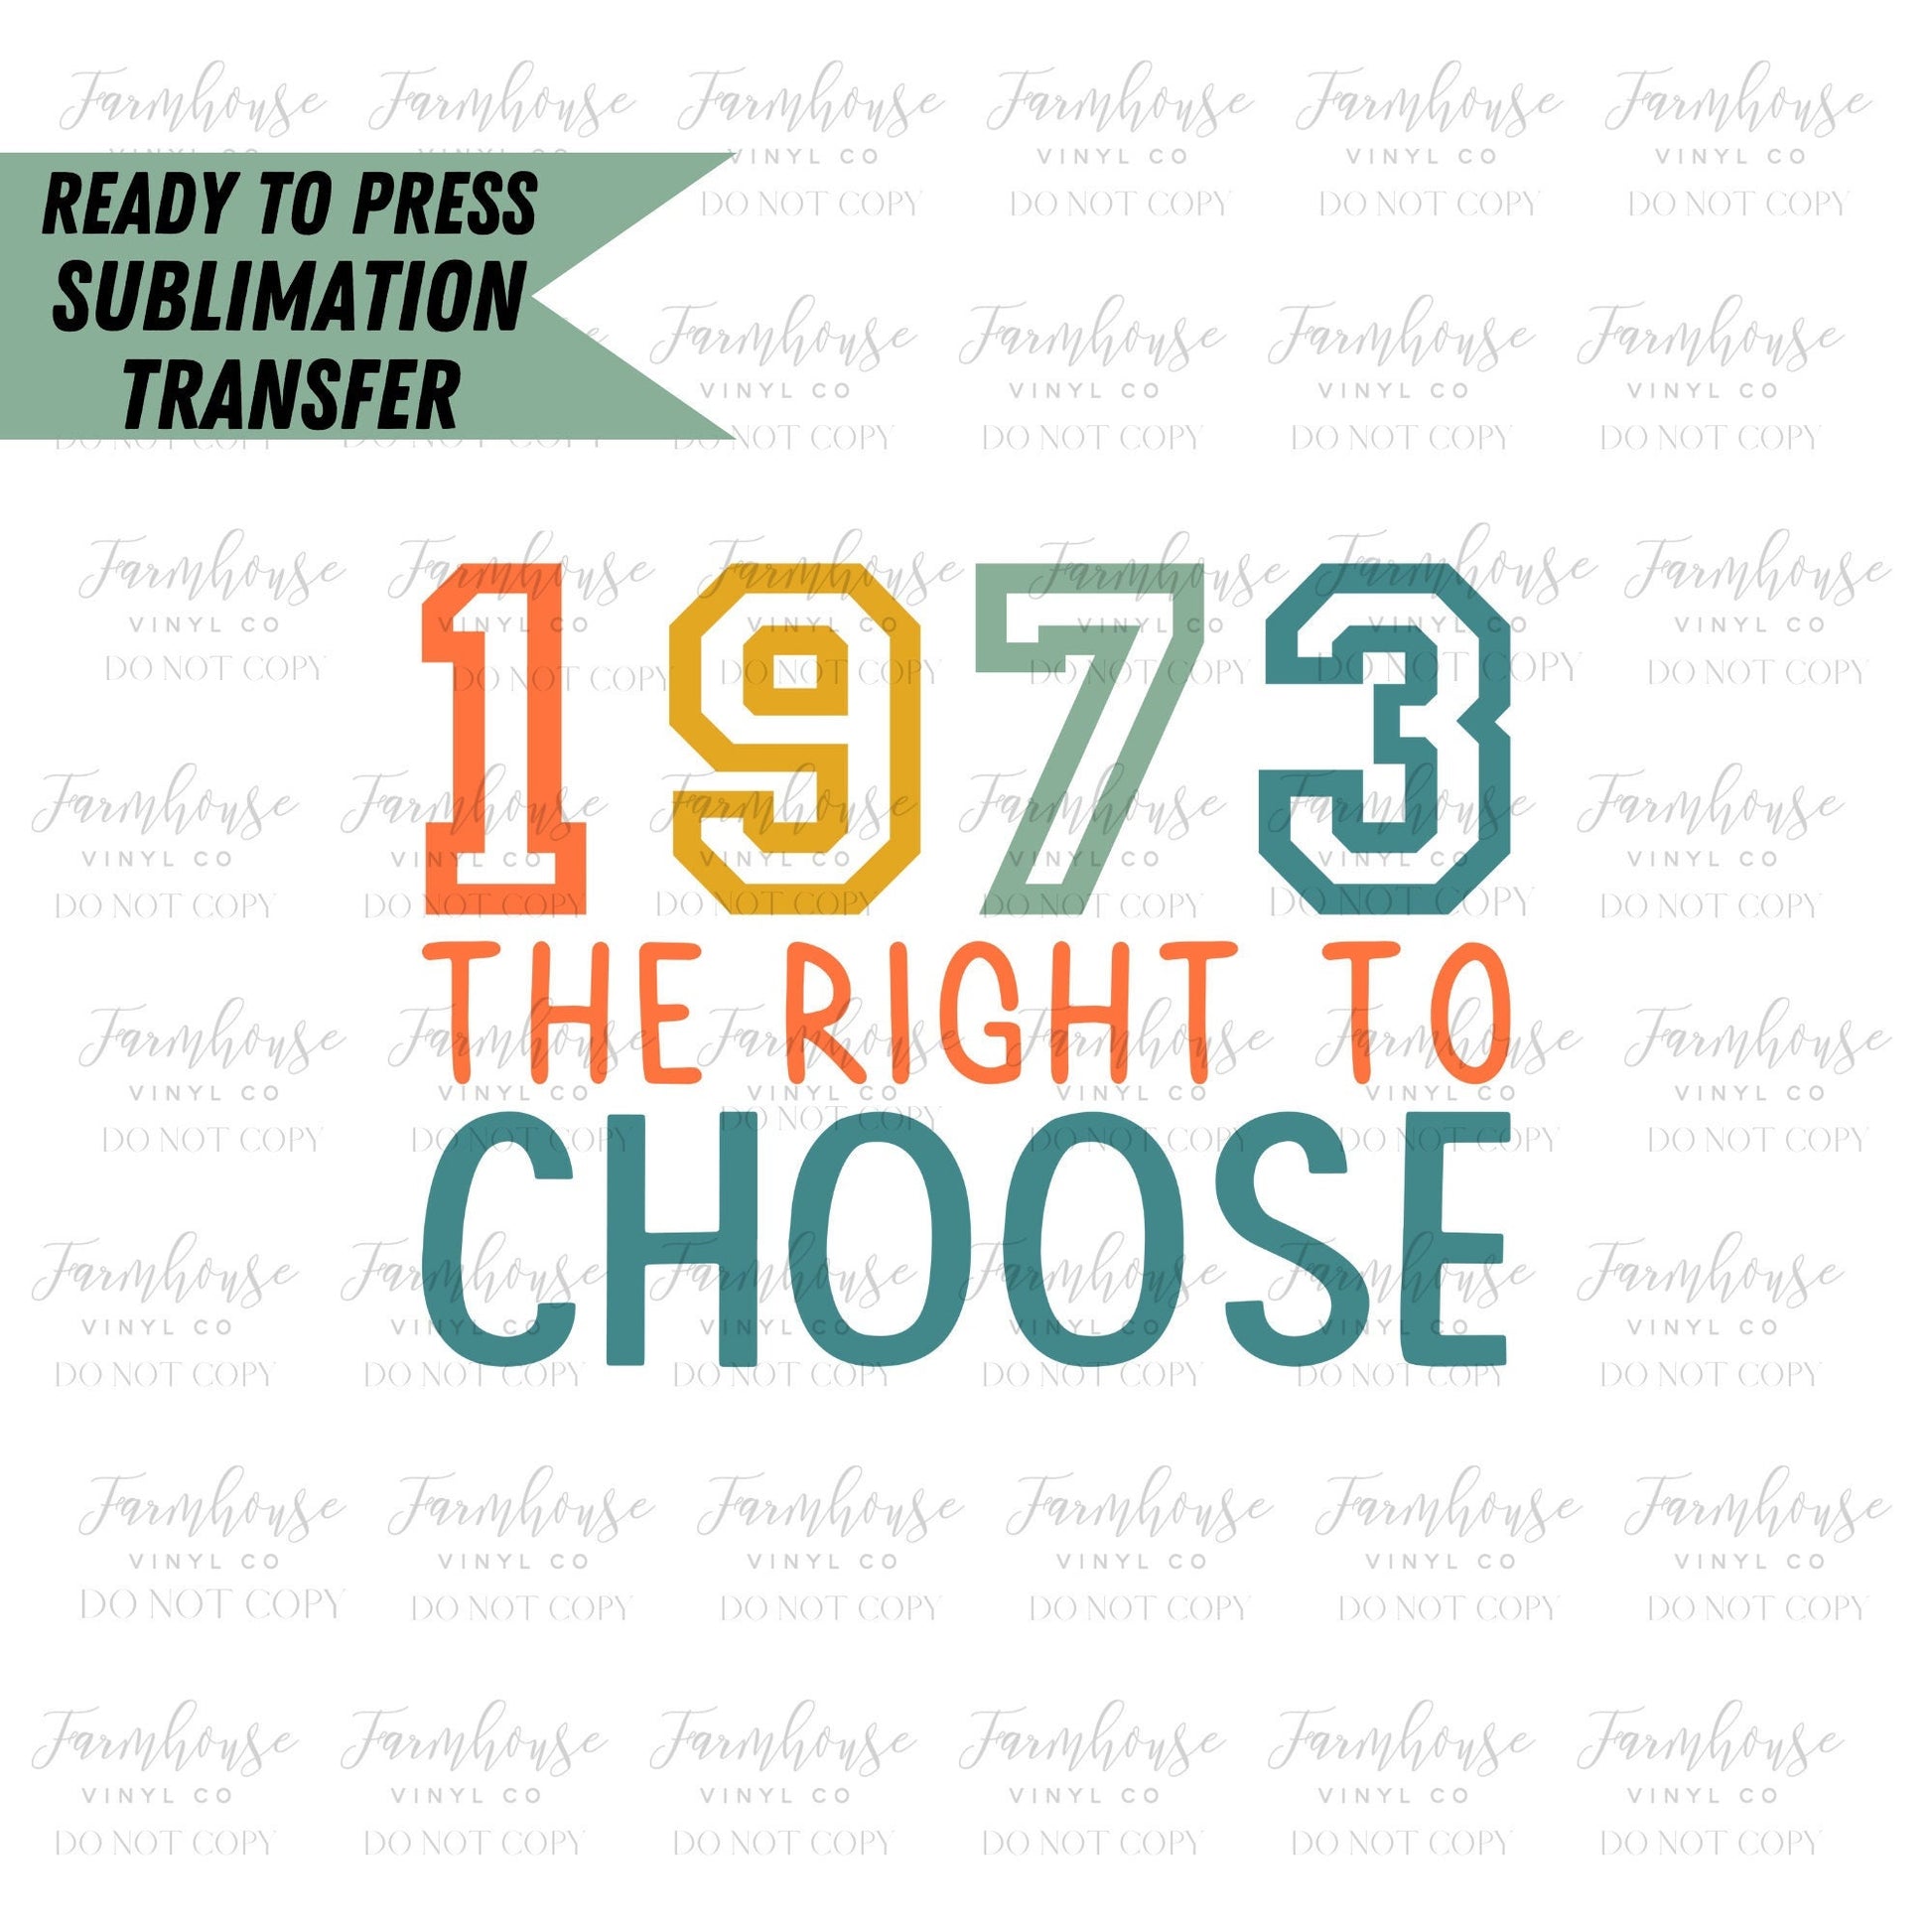 1973 Right to Choose, Ready To Press, Sublimation Transfers, Sublimation Print, Pro Roe, Abortion is Healthcare, Feminist Sub Transfer - Farmhouse Vinyl Co